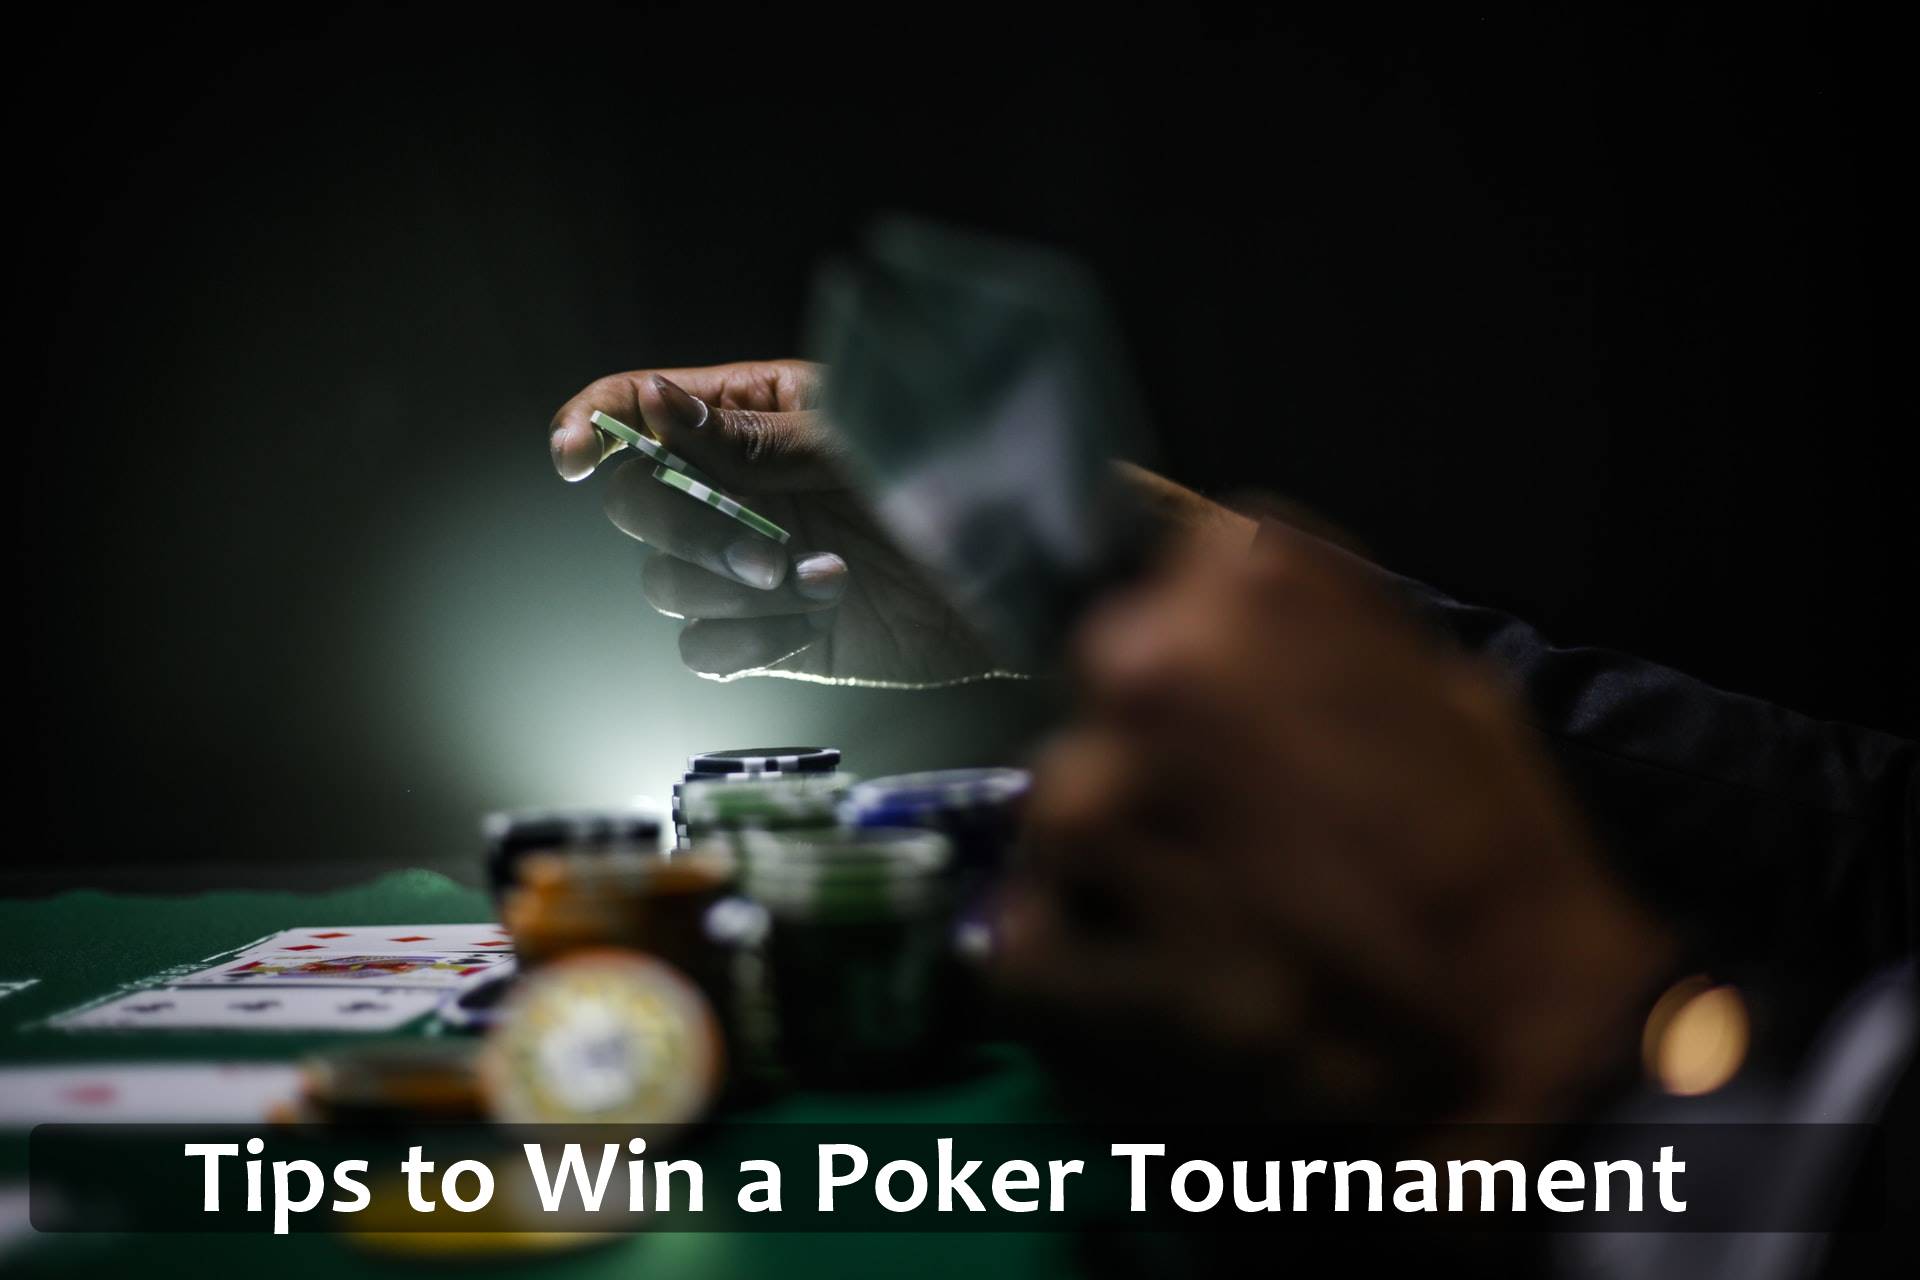 Tips to Win a Poker Tournament